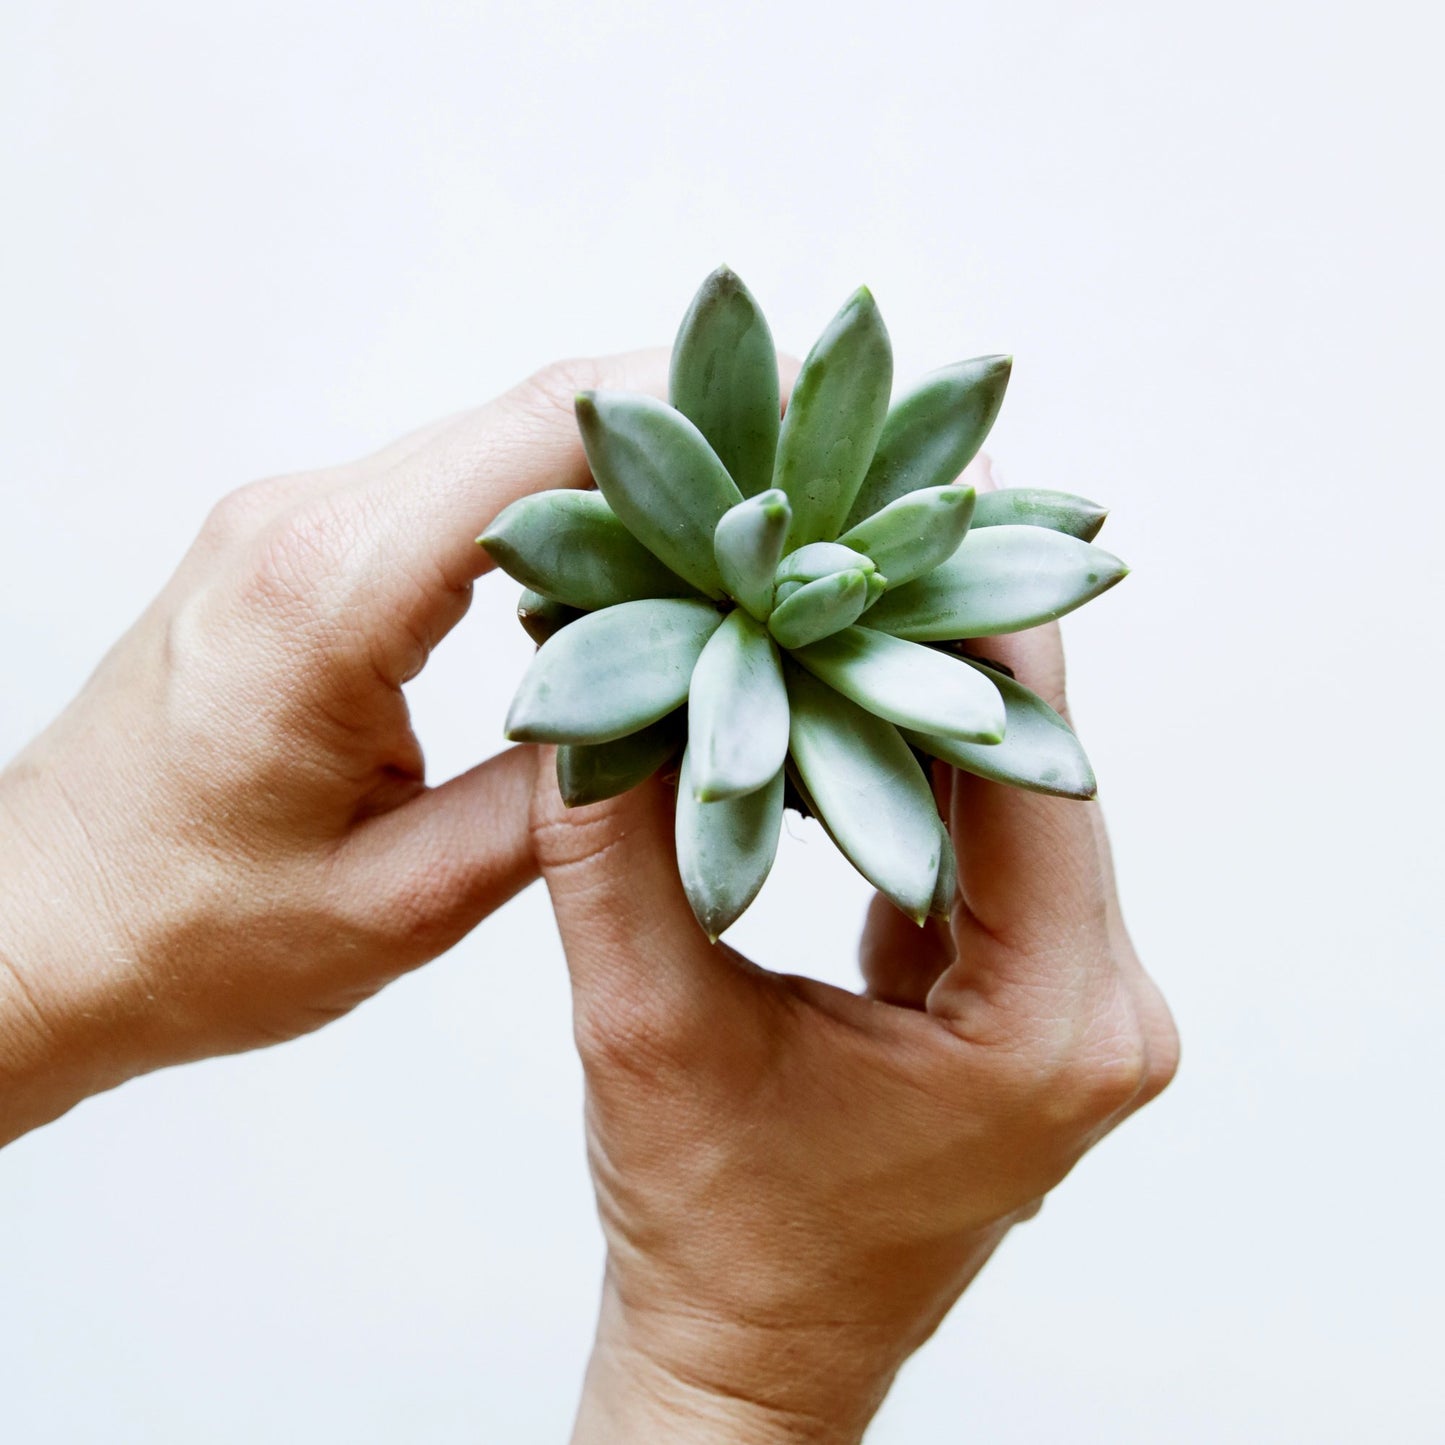 On a white background is a model holding up a Little Jewel succulent.